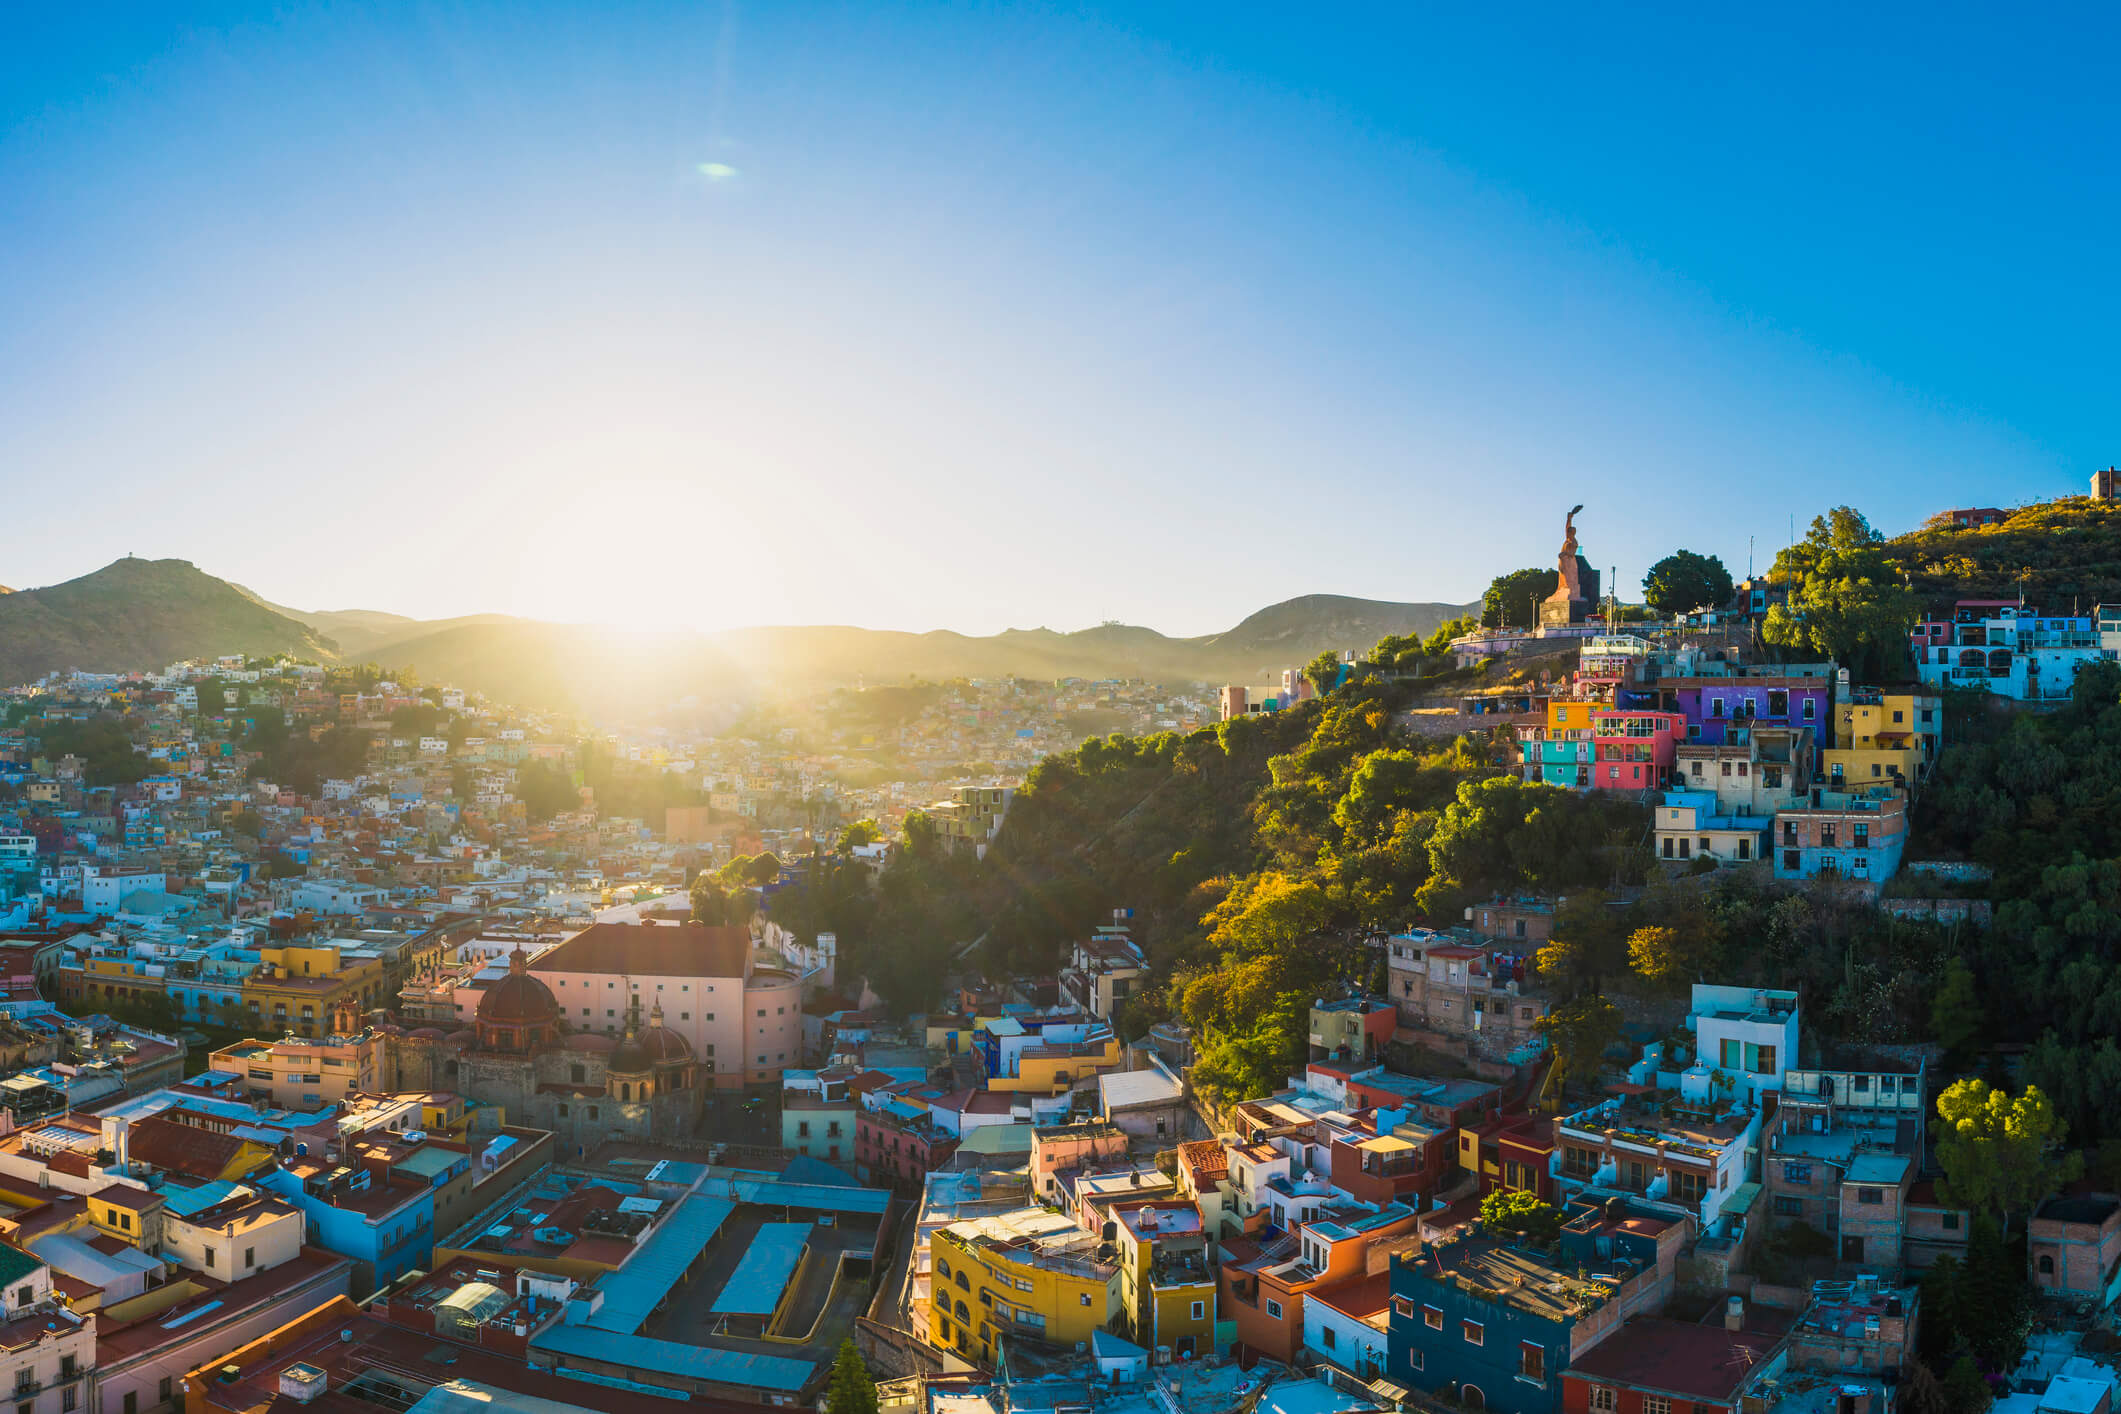 Aerial view of Guanajuato City at sunrise, Mexico. Symbolic of Jellysmack's expansion into Latin American Markets with Top Latin American Creators